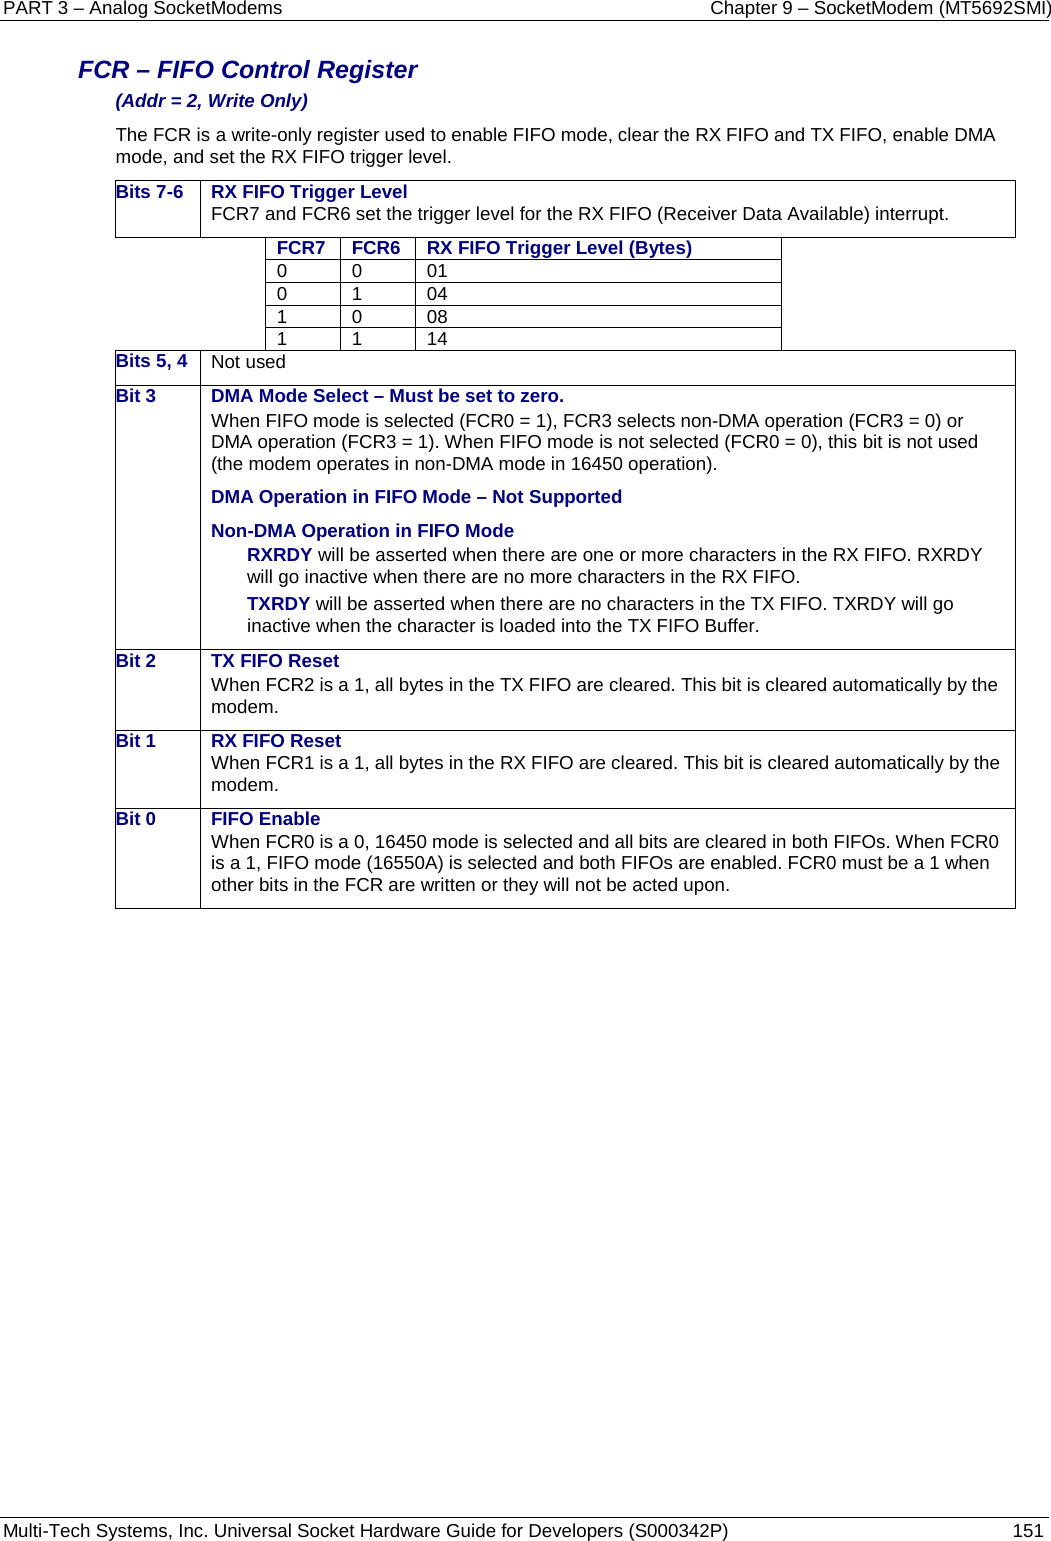 PART 3 – Analog SocketModems    Chapter 9 – SocketModem (MT5692SMI) Multi-Tech Systems, Inc. Universal Socket Hardware Guide for Developers (S000342P)  151  FCR – FIFO Control Register (Addr = 2, Write Only) The FCR is a write-only register used to enable FIFO mode, clear the RX FIFO and TX FIFO, enable DMA mode, and set the RX FIFO trigger level. Bits 7-6 RX FIFO Trigger Level FCR7 and FCR6 set the trigger level for the RX FIFO (Receiver Data Available) interrupt. FCR7 FCR6 RX FIFO Trigger Level (Bytes) 0 0 01 0 1 04 1 0 08 1 1 14 Bits 5, 4 Not used Bit 3 DMA Mode Select – Must be set to zero. When FIFO mode is selected (FCR0 = 1), FCR3 selects non-DMA operation (FCR3 = 0) or DMA operation (FCR3 = 1). When FIFO mode is not selected (FCR0 = 0), this bit is not used (the modem operates in non-DMA mode in 16450 operation). DMA Operation in FIFO Mode – Not Supported Non-DMA Operation in FIFO Mode RXRDY will be asserted when there are one or more characters in the RX FIFO. RXRDY will go inactive when there are no more characters in the RX FIFO. TXRDY will be asserted when there are no characters in the TX FIFO. TXRDY will go inactive when the character is loaded into the TX FIFO Buffer. Bit 2 TX FIFO Reset When FCR2 is a 1, all bytes in the TX FIFO are cleared. This bit is cleared automatically by the modem. Bit 1 RX FIFO Reset When FCR1 is a 1, all bytes in the RX FIFO are cleared. This bit is cleared automatically by the modem. Bit 0 FIFO Enable When FCR0 is a 0, 16450 mode is selected and all bits are cleared in both FIFOs. When FCR0 is a 1, FIFO mode (16550A) is selected and both FIFOs are enabled. FCR0 must be a 1 when other bits in the FCR are written or they will not be acted upon.     